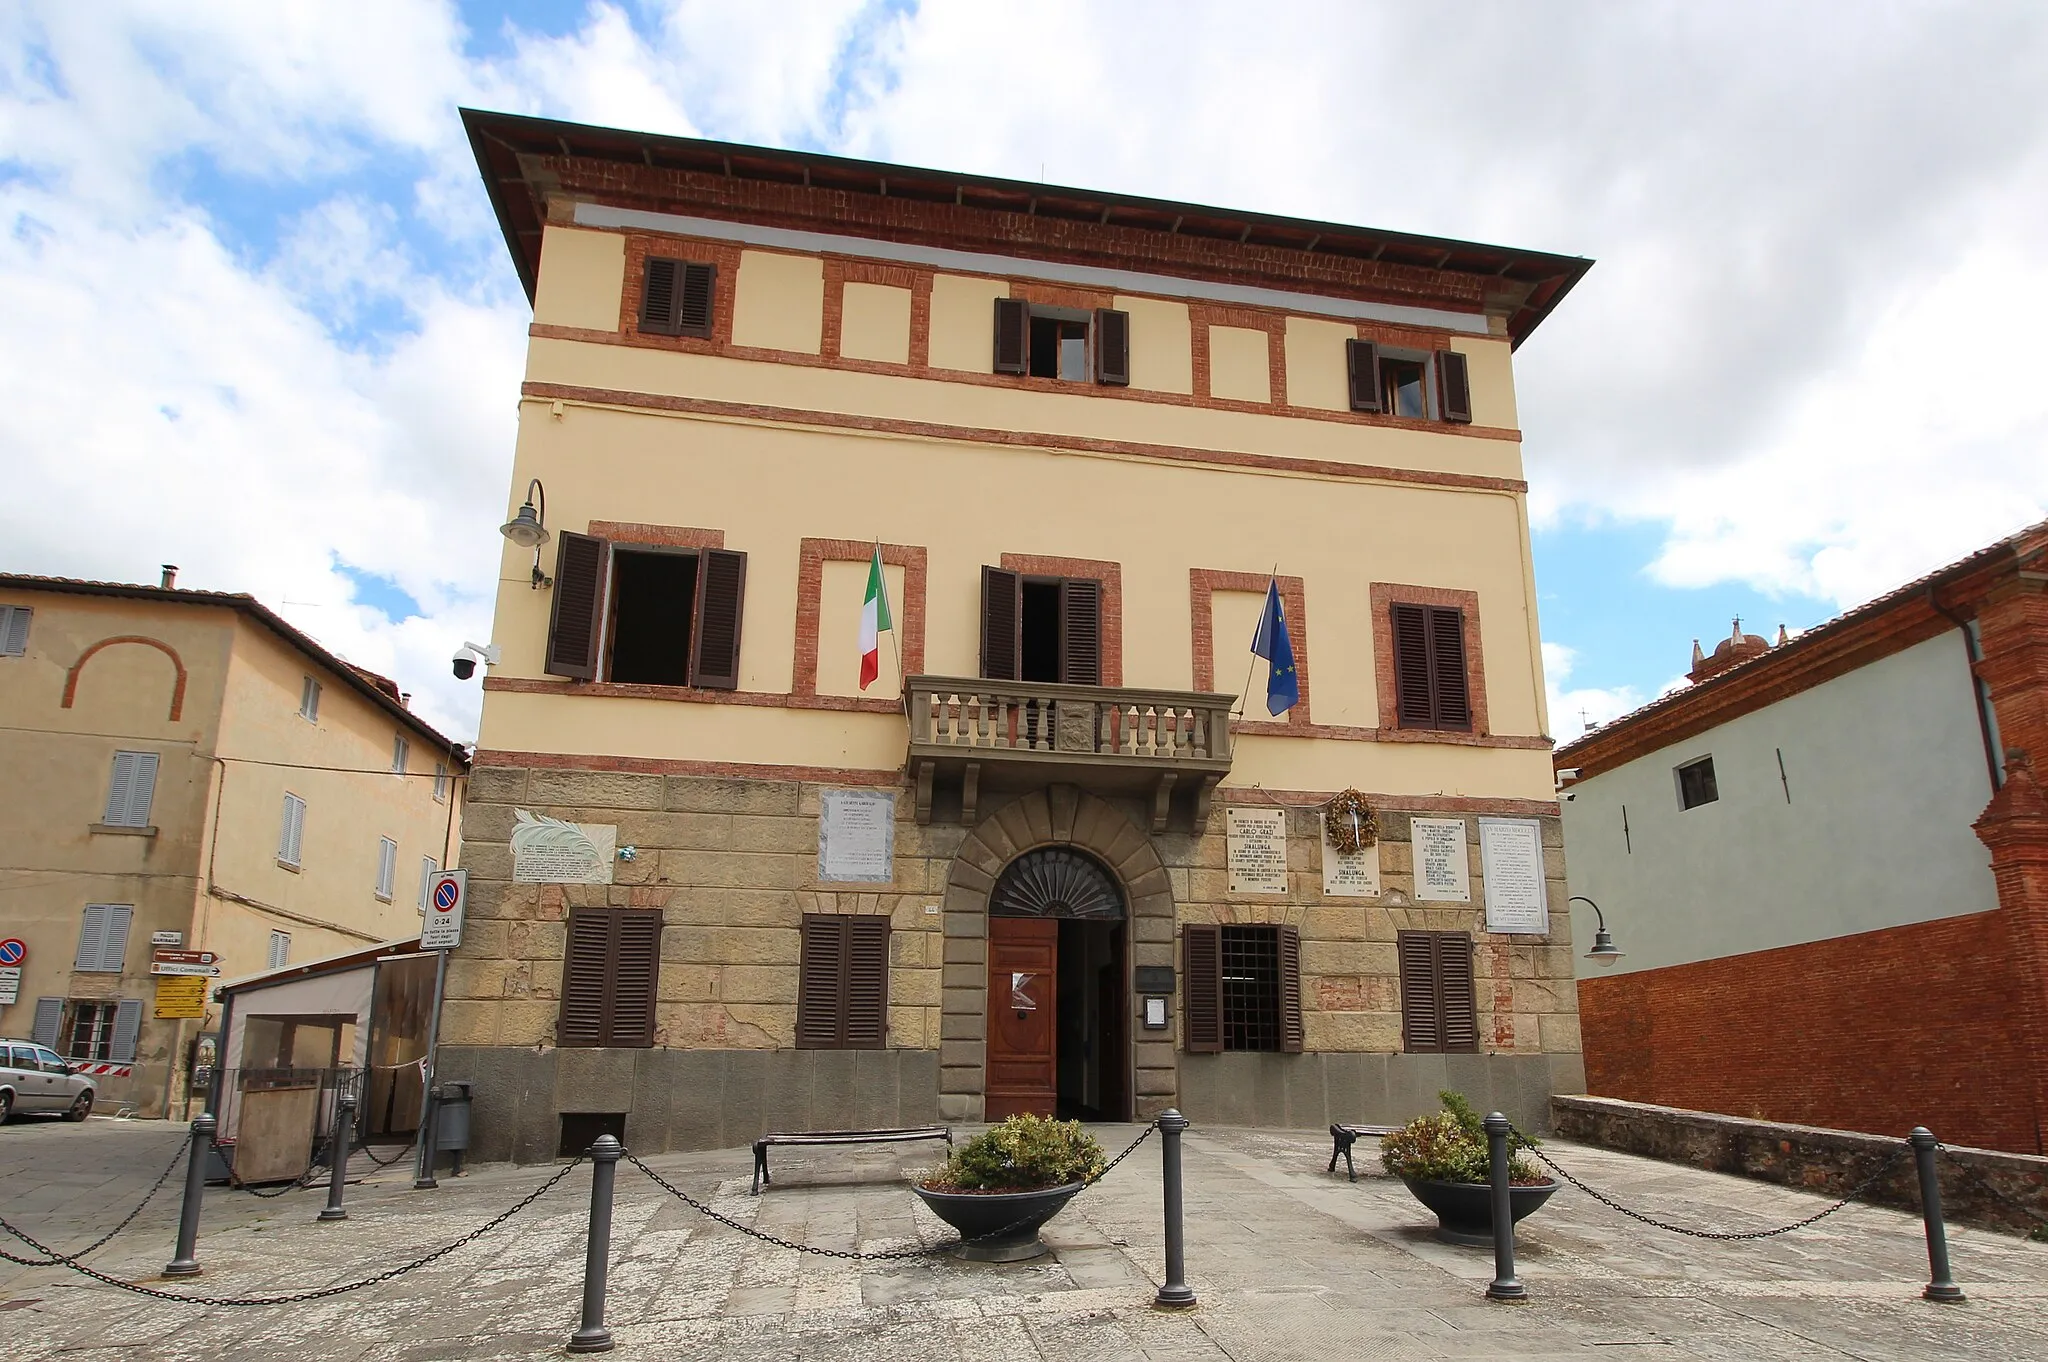 Photo showing: Palazzo Comunale, Town hall in the center of Sinalunga, Province of Siena, Tuscany, Italy